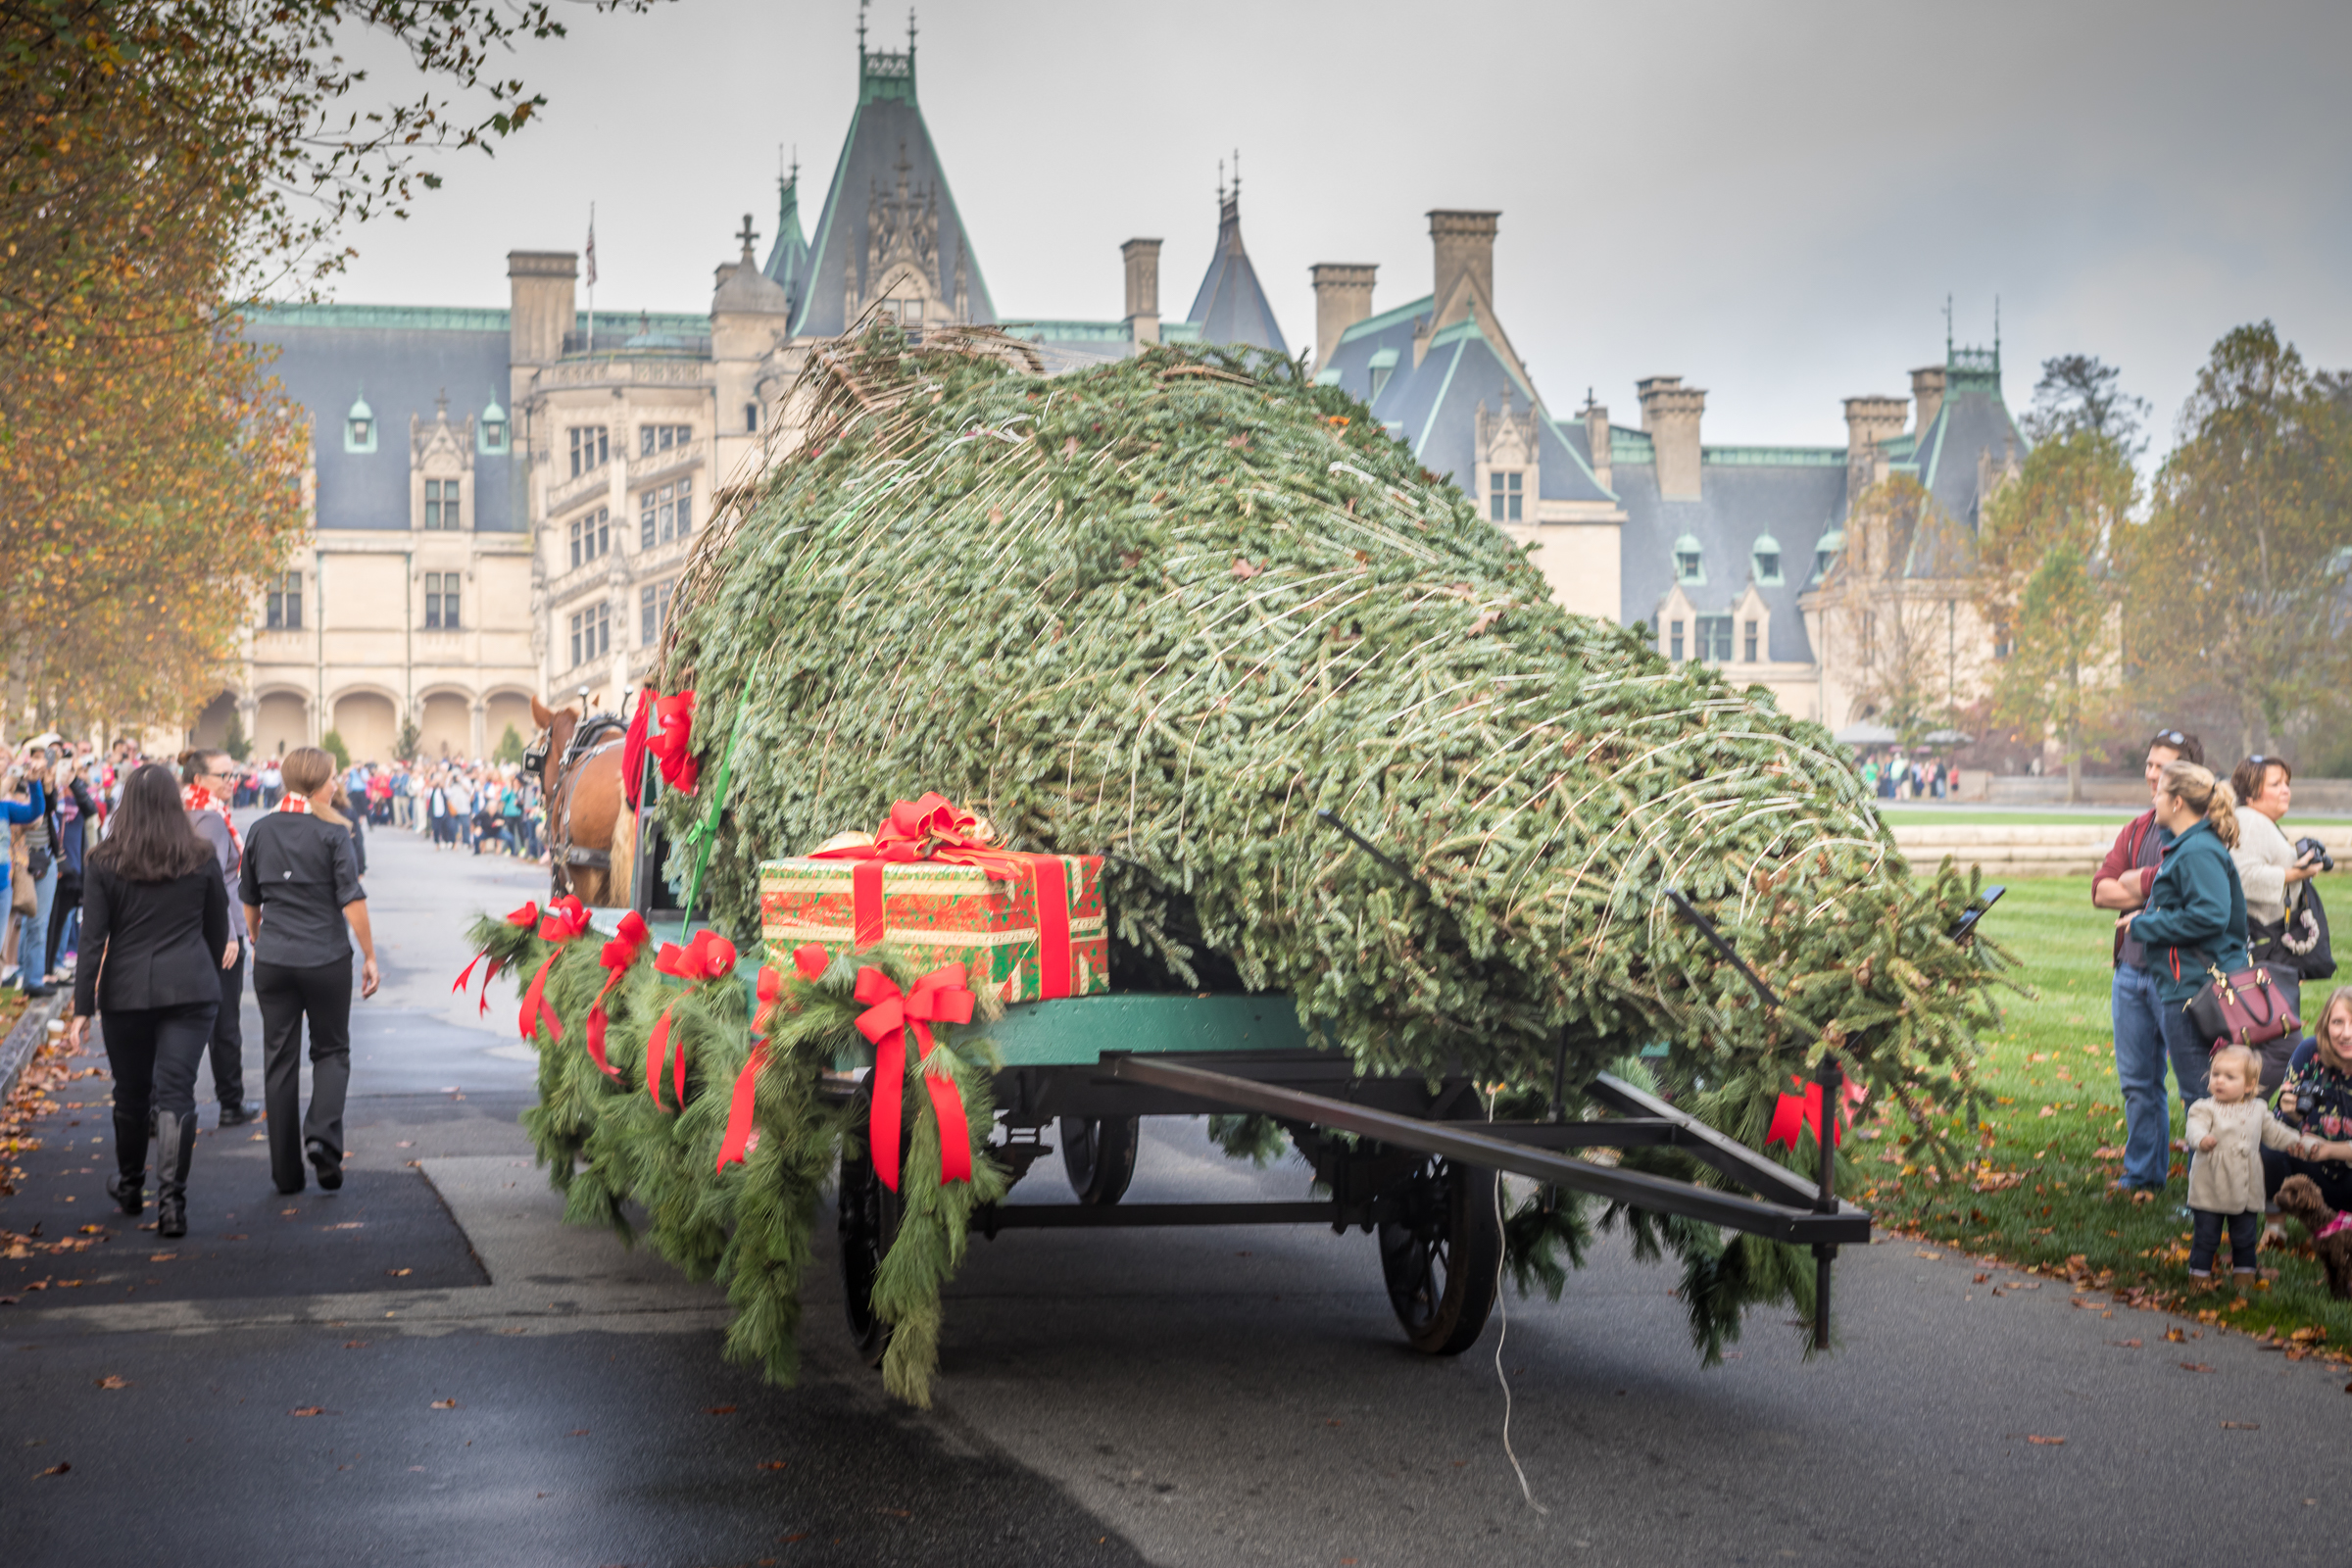 PHOTO: A 35-foot tall Fraser fir tree makes its way up the Biltmore Estate’s long driveway, courtesy of a horse-drawn carriage, signaling the start of the Christmas season.